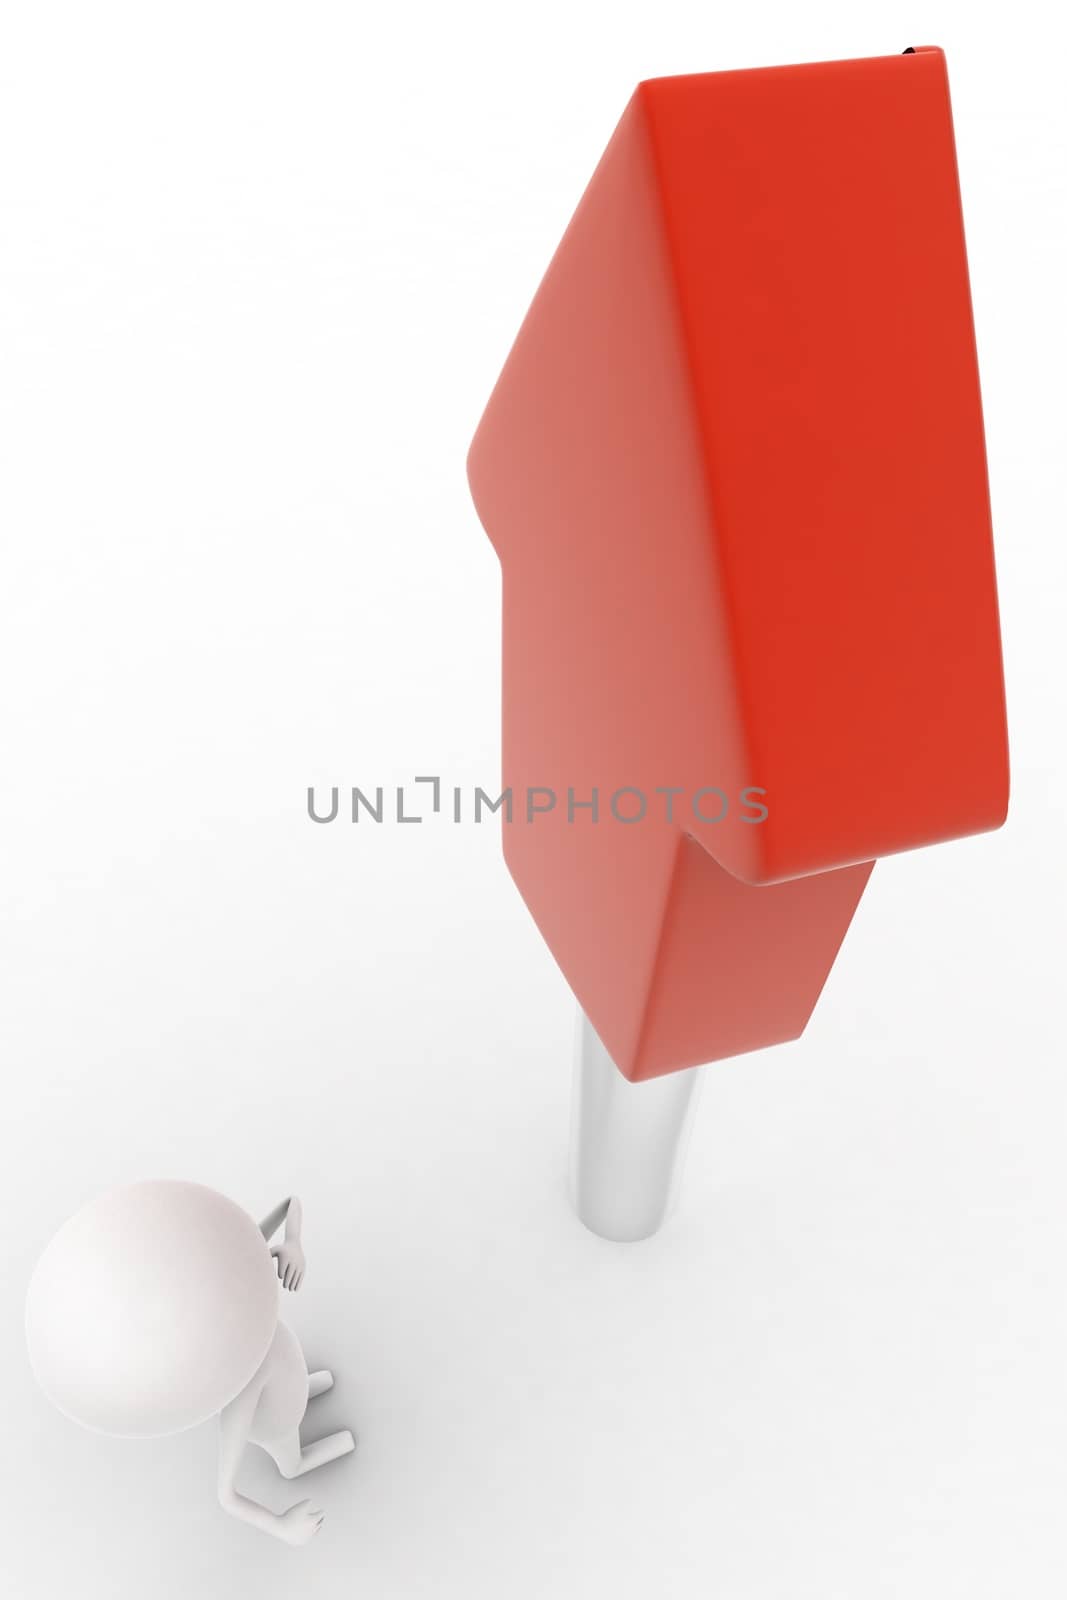 3d man wondering while seeing a large upward arrow concept by touchmenithin@gmail.com